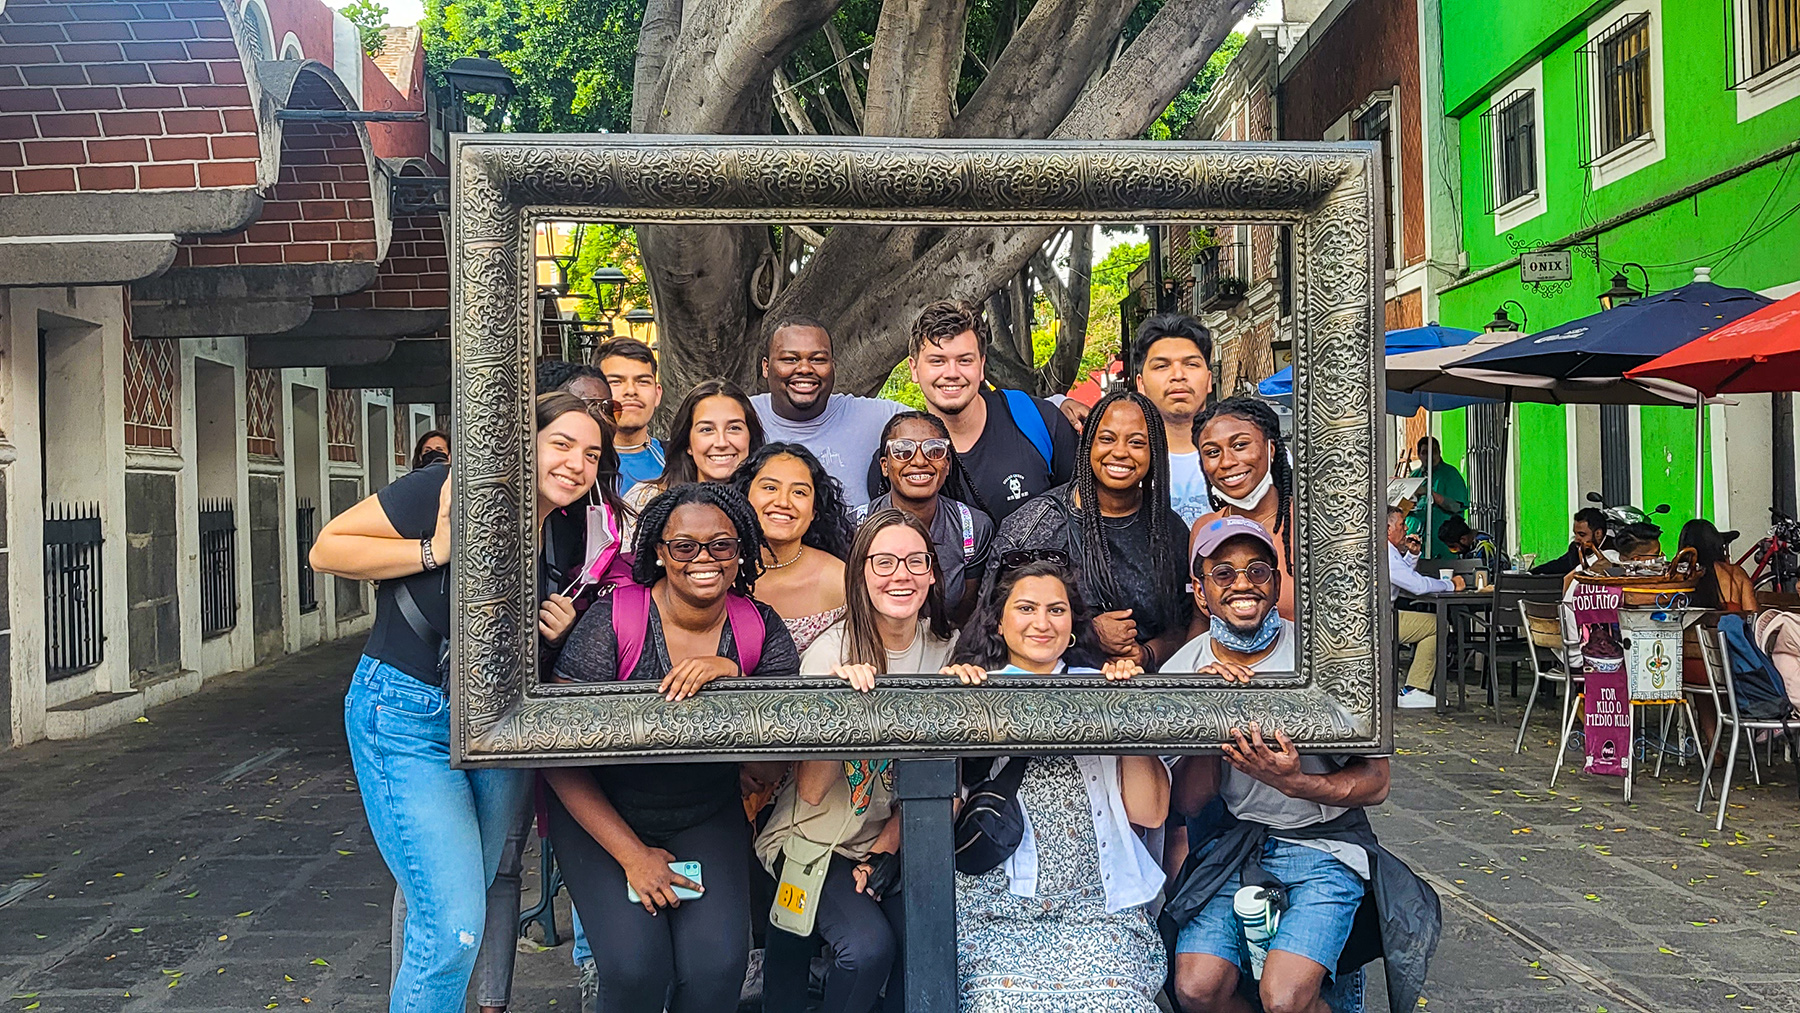 A group of students posing inside a "frame" for a photo.